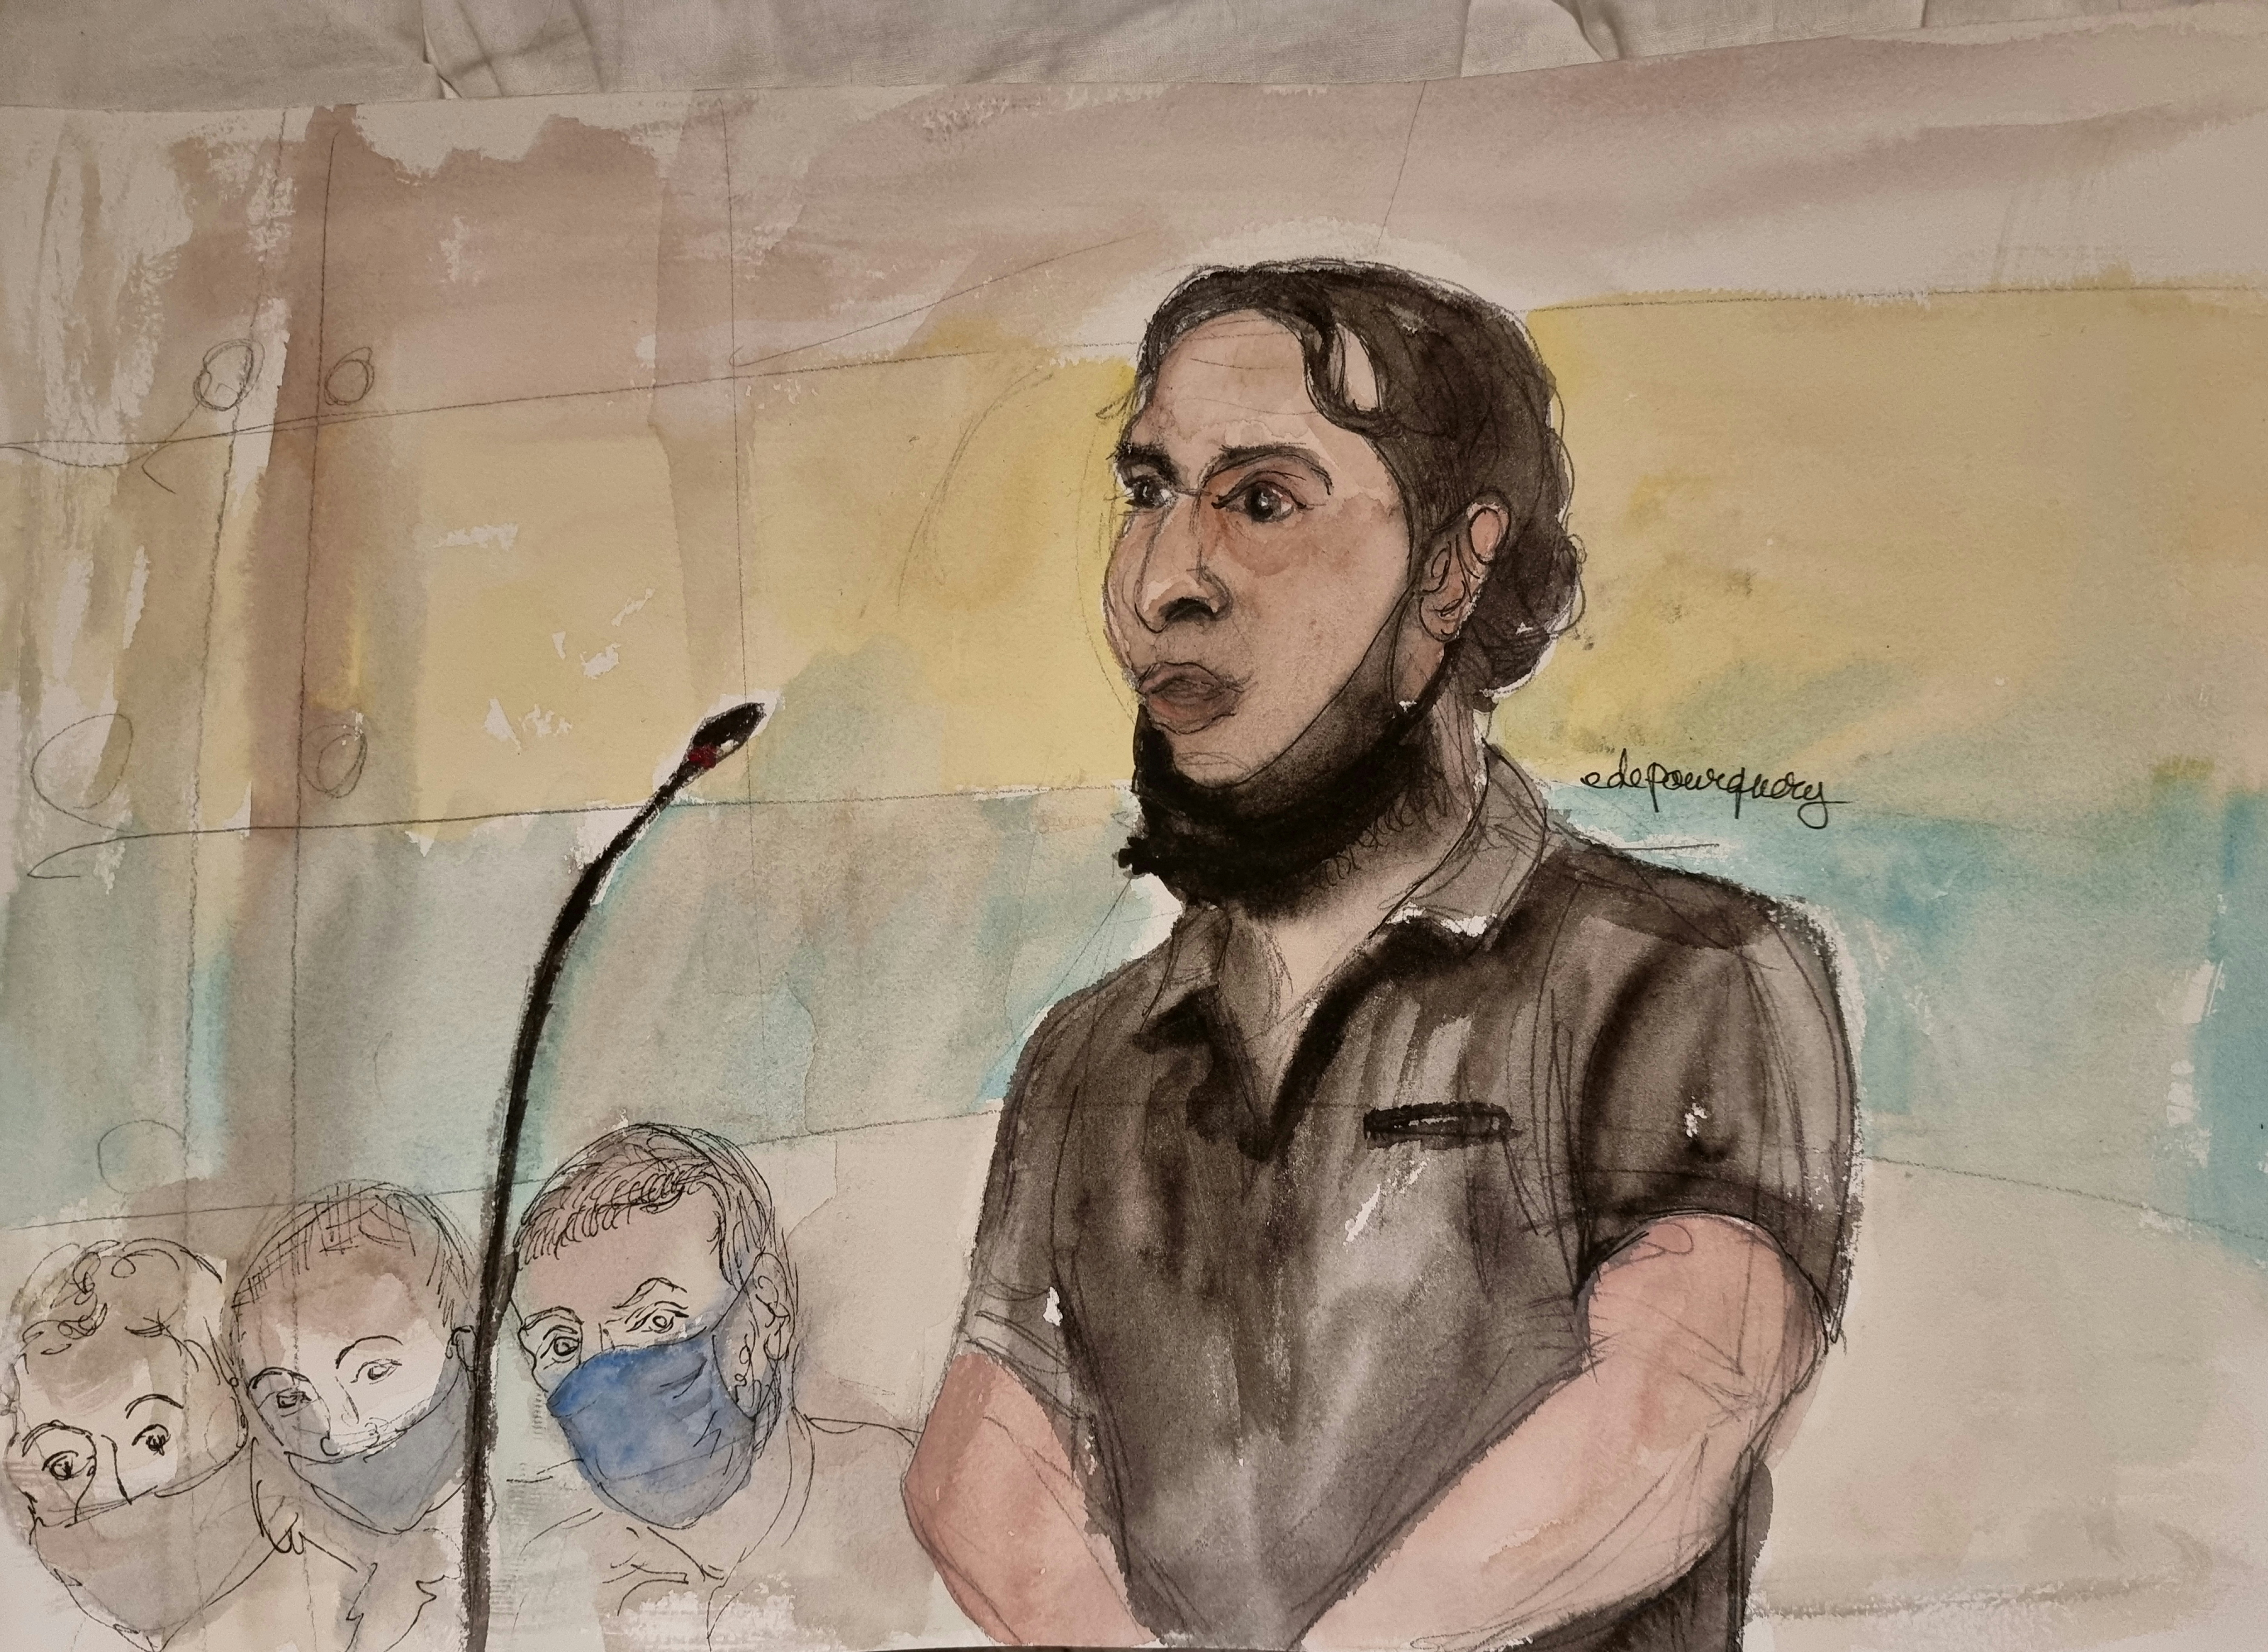 Sketches show Paris' November 2015 attacks suspect during trial at Paris courthouse